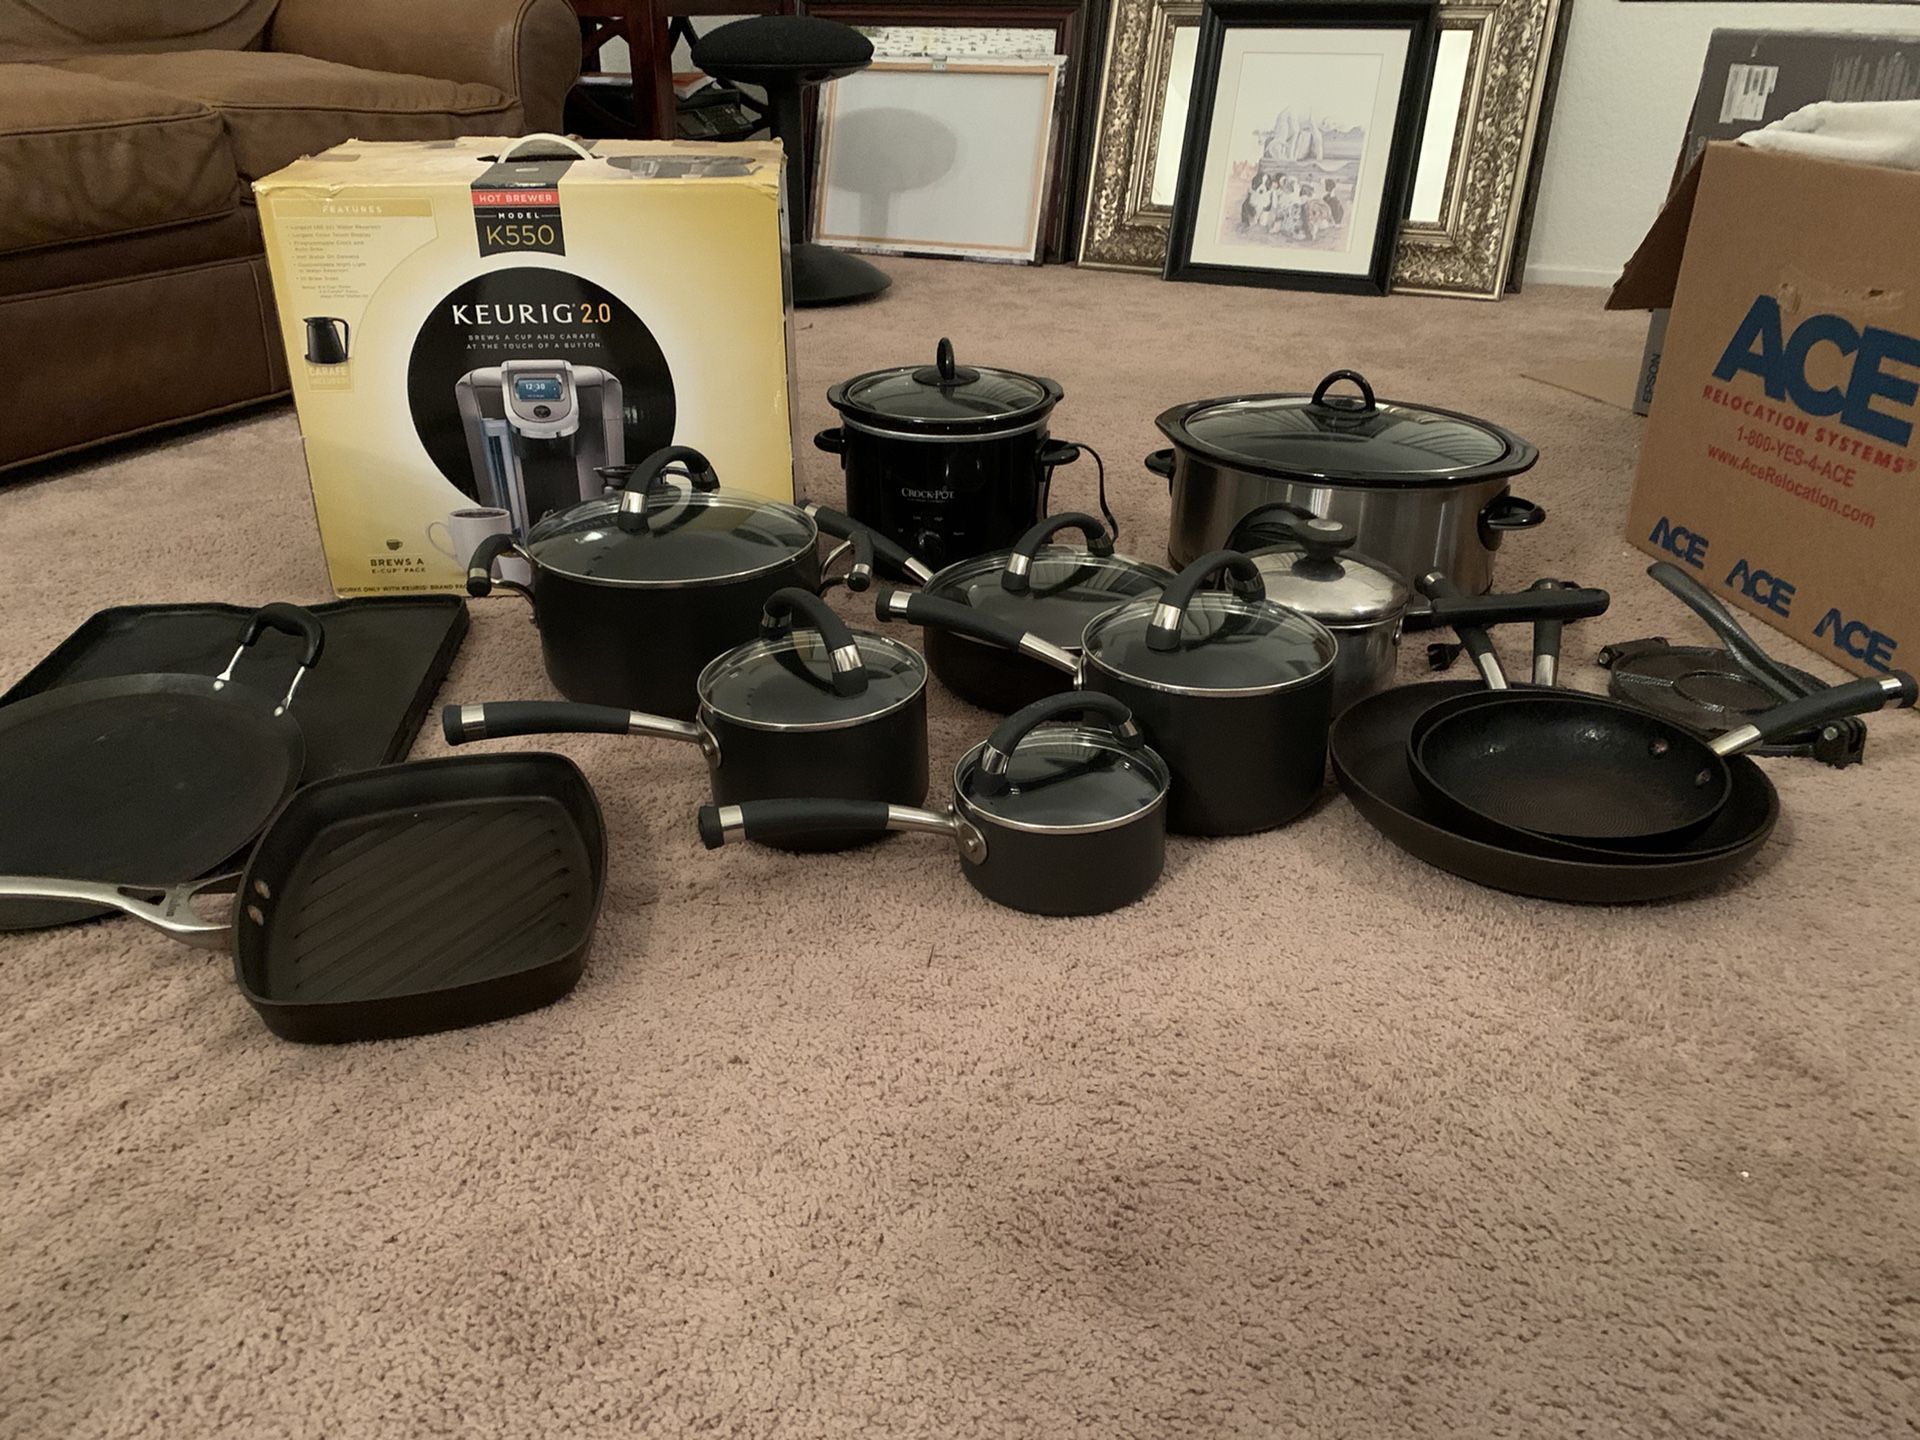 Cookware and Keurig 2.0